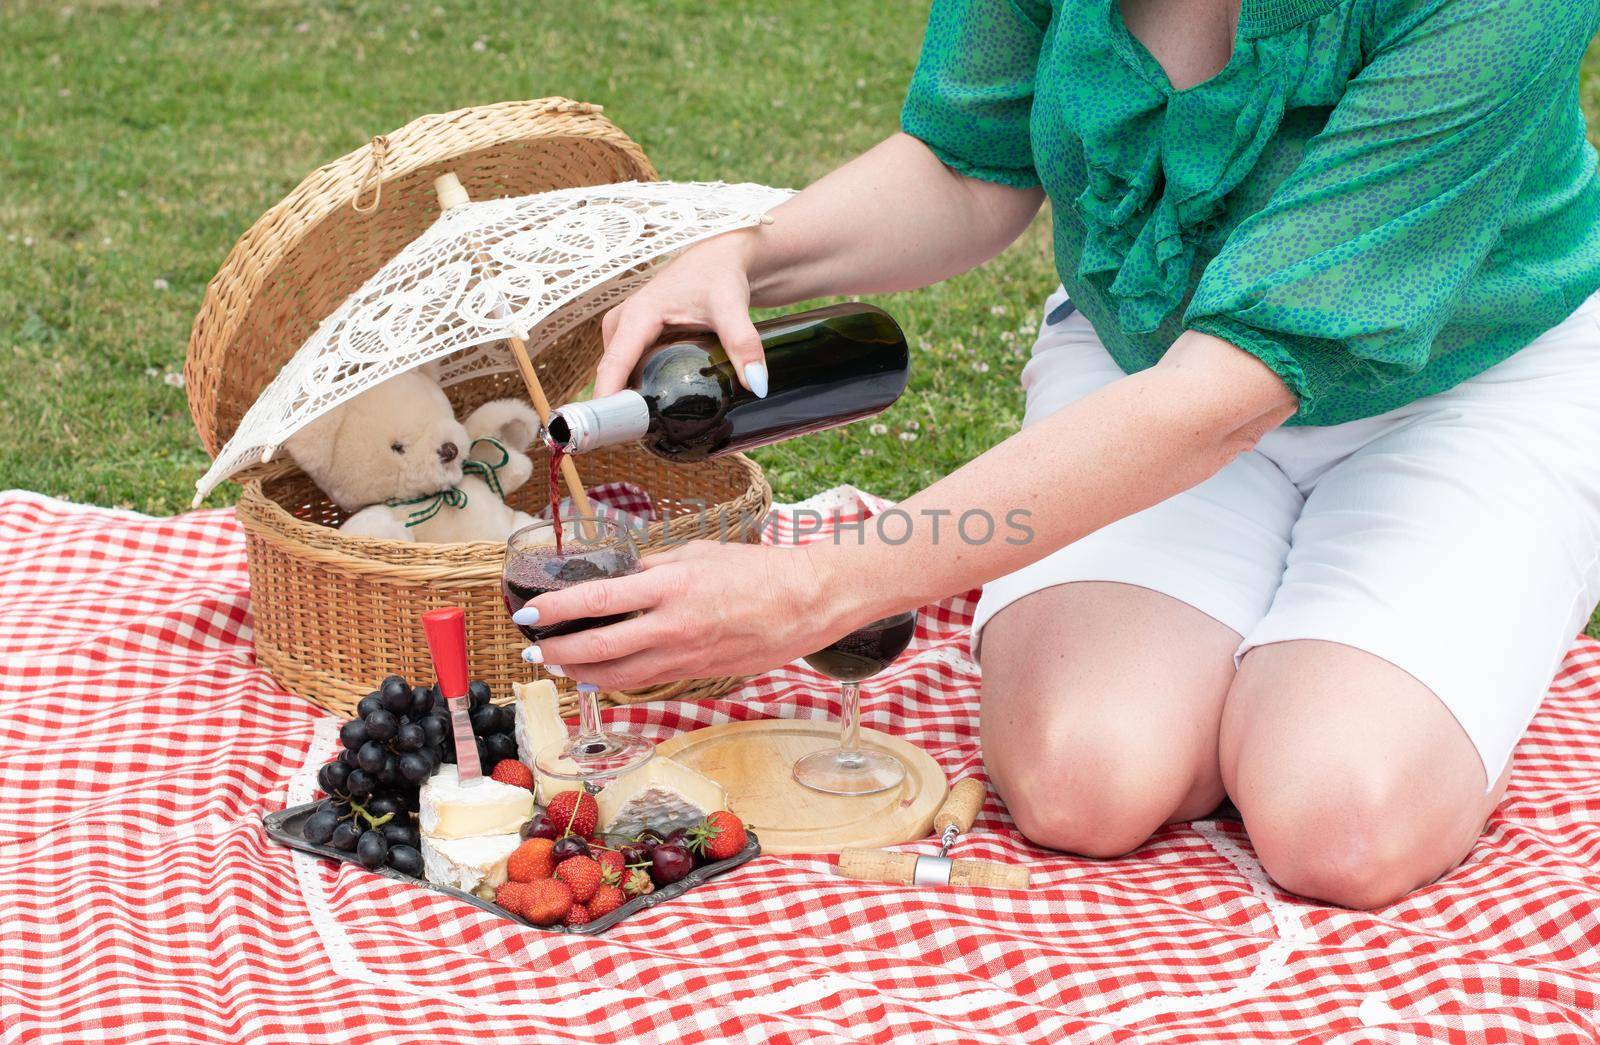 woman in a green blouse sits on a red checkered picnic rug, red wine and chees by KaterinaDalemans